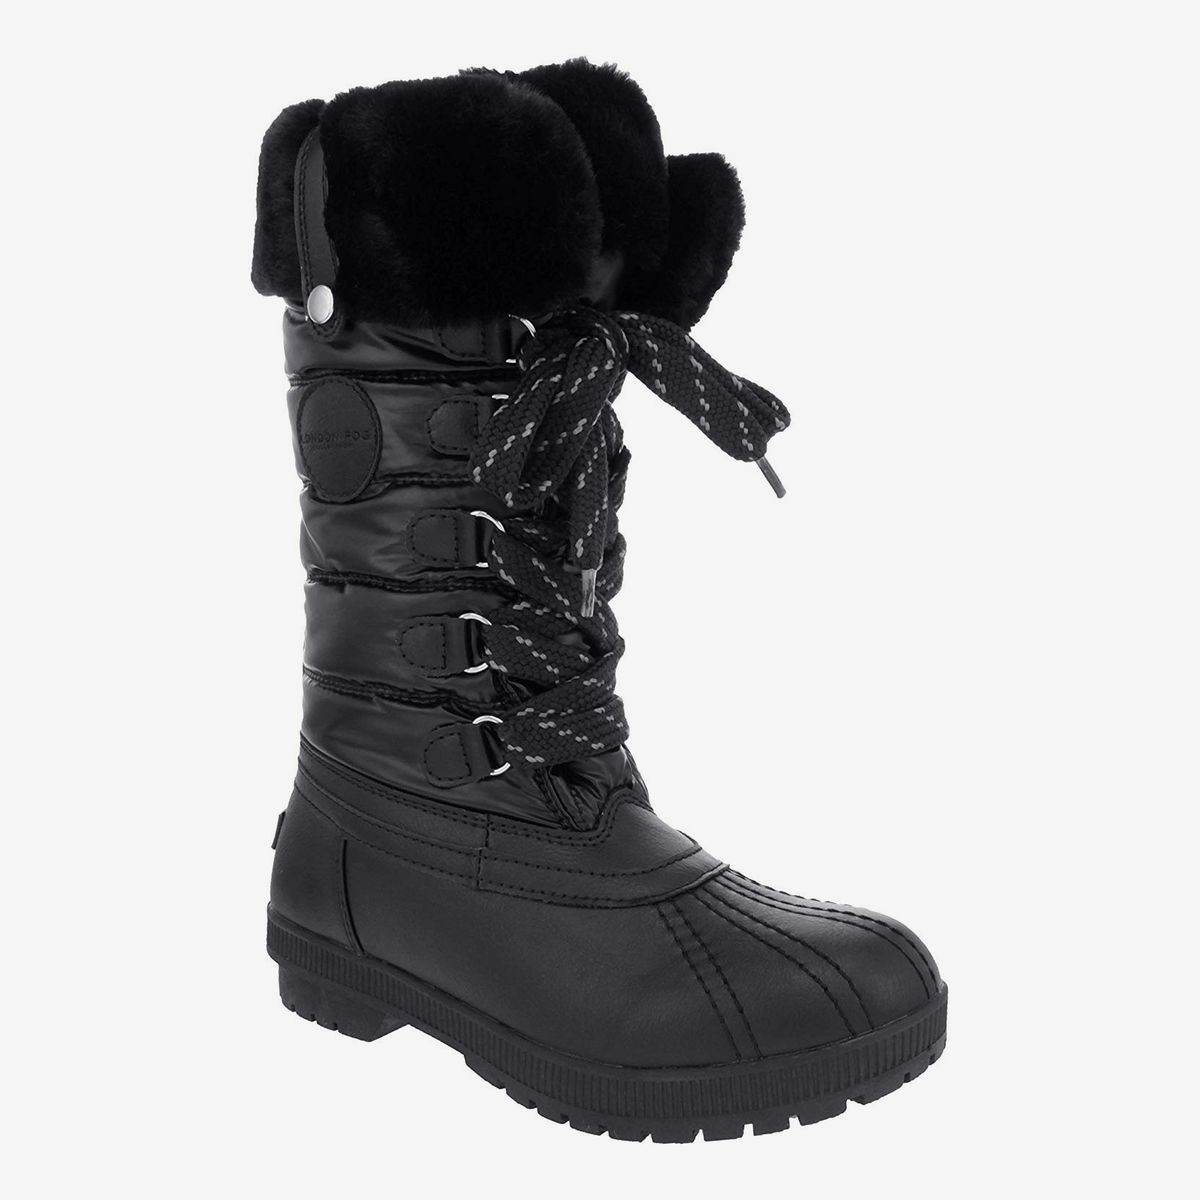 black boots for snow